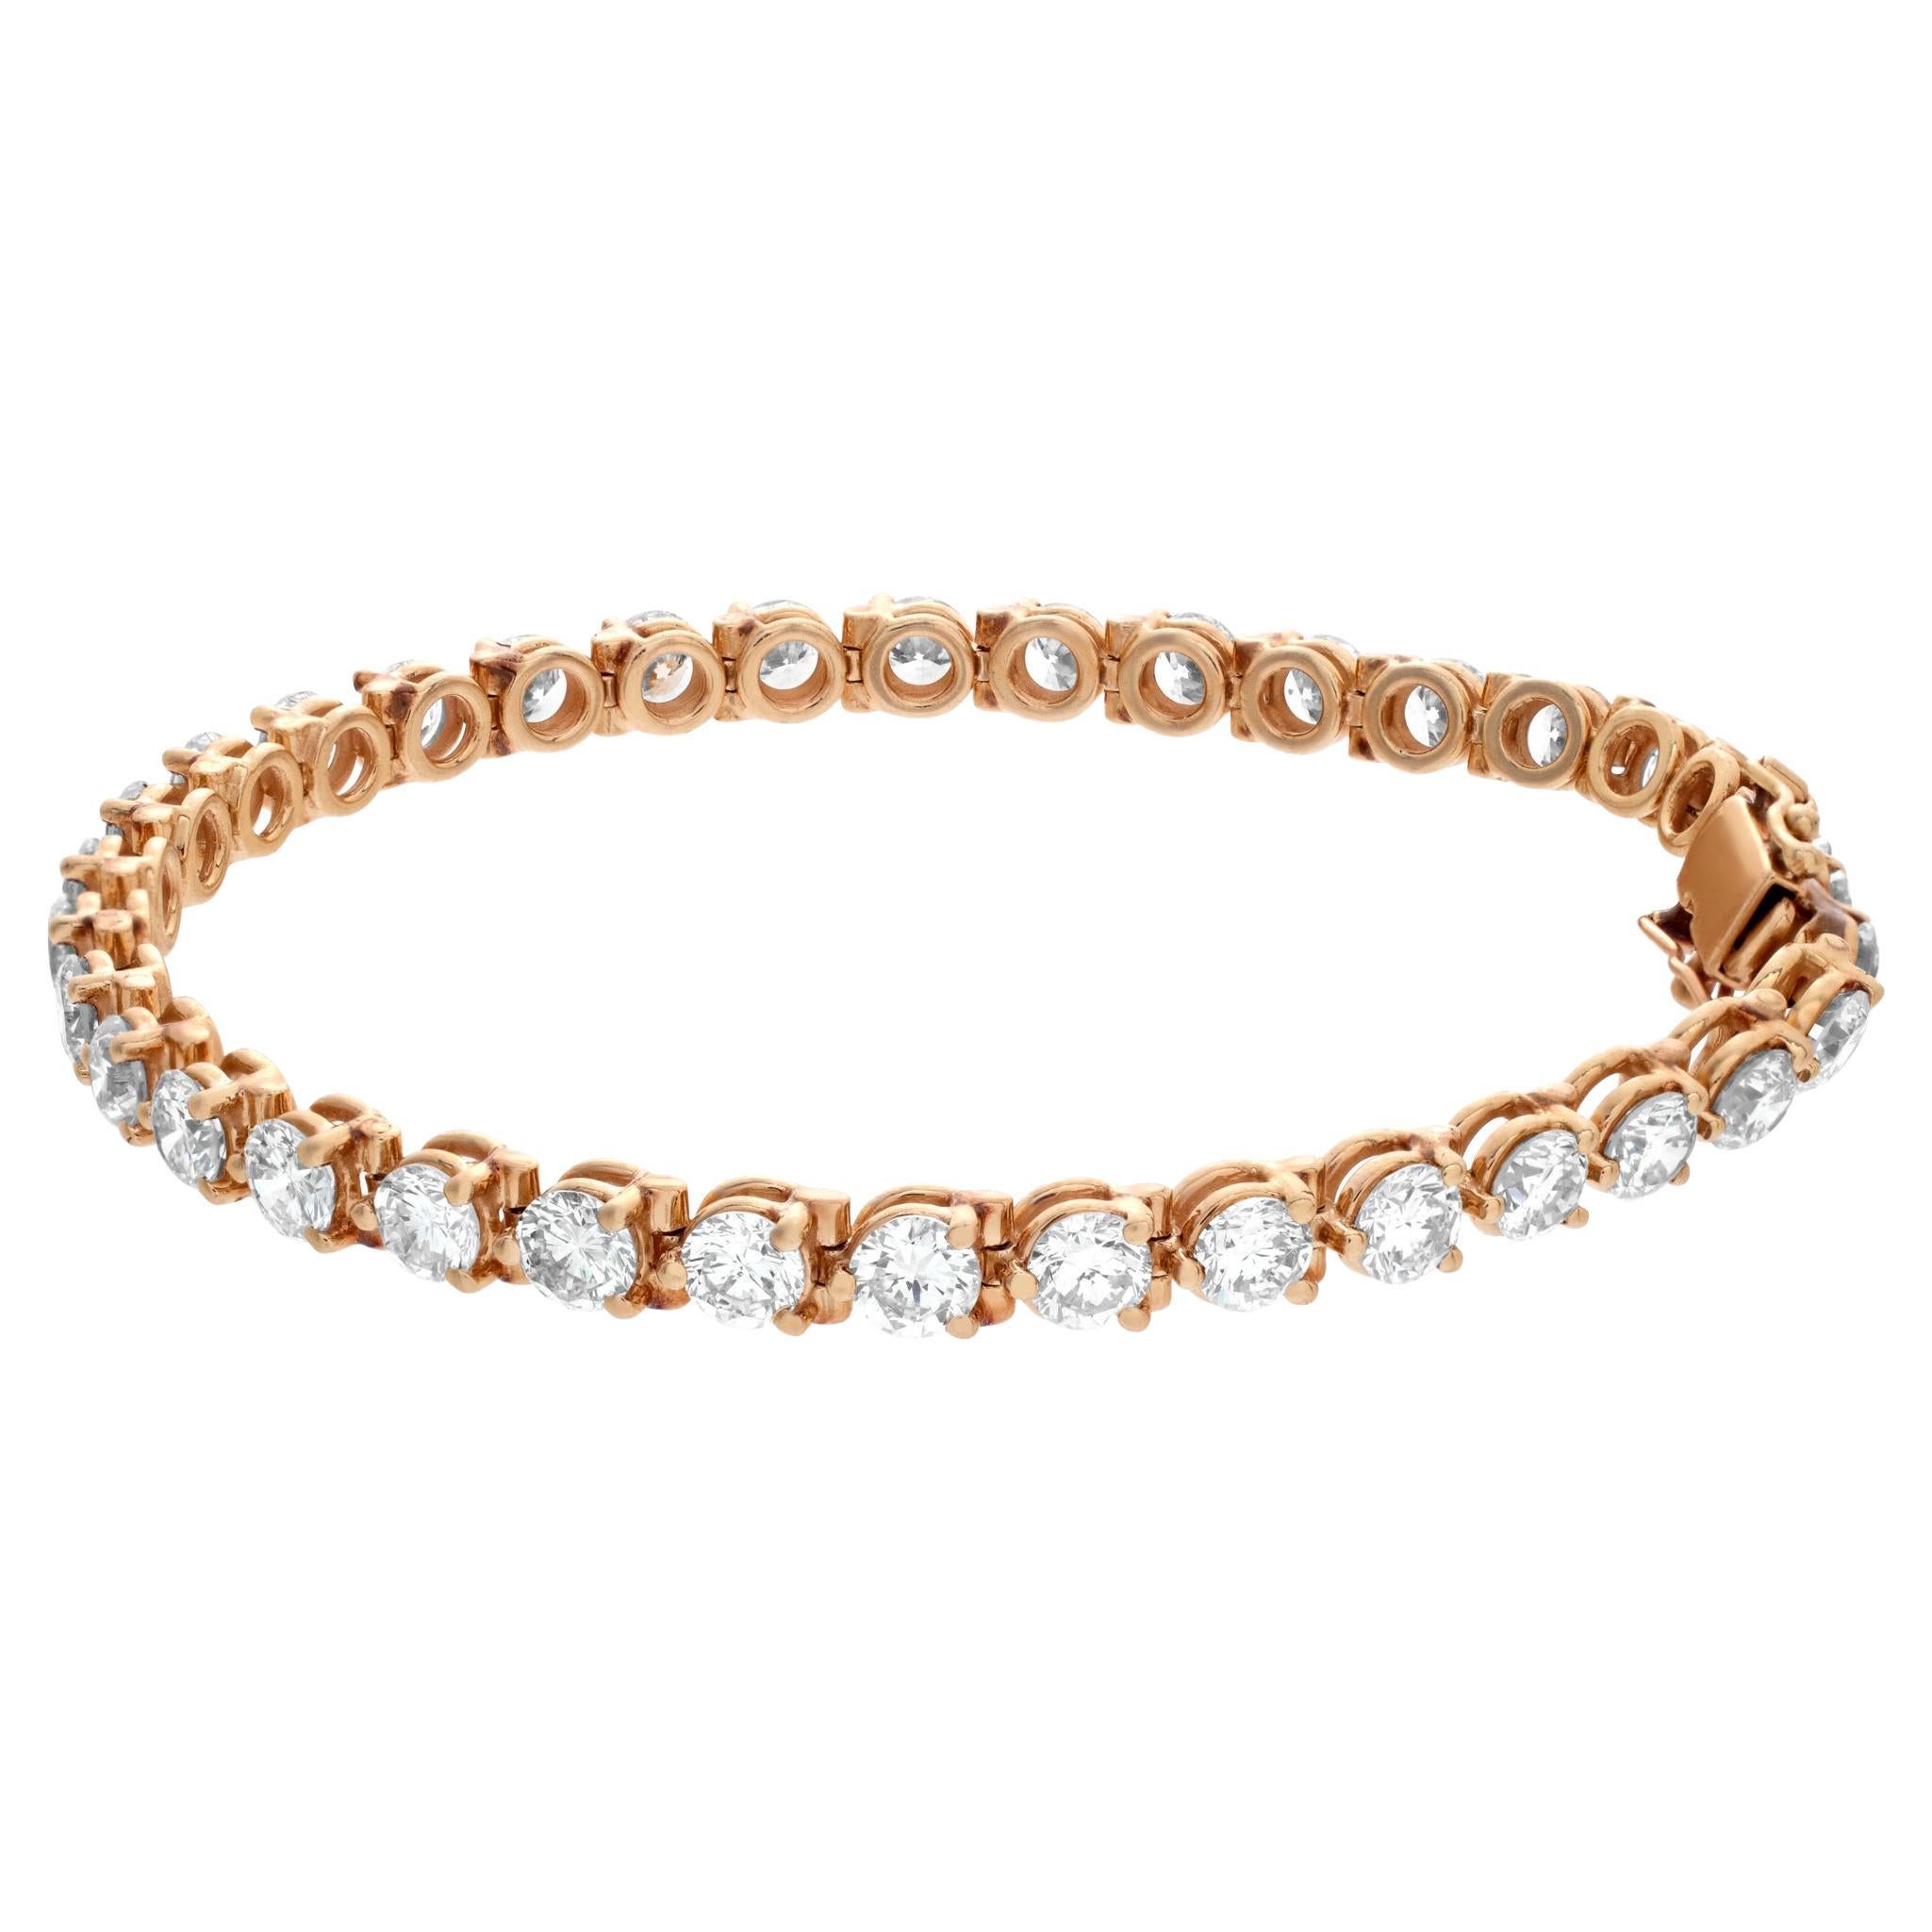 Diamond Line Bracelet in 14k Yellow Gold with Approximately 10 Carats in Diamond For Sale